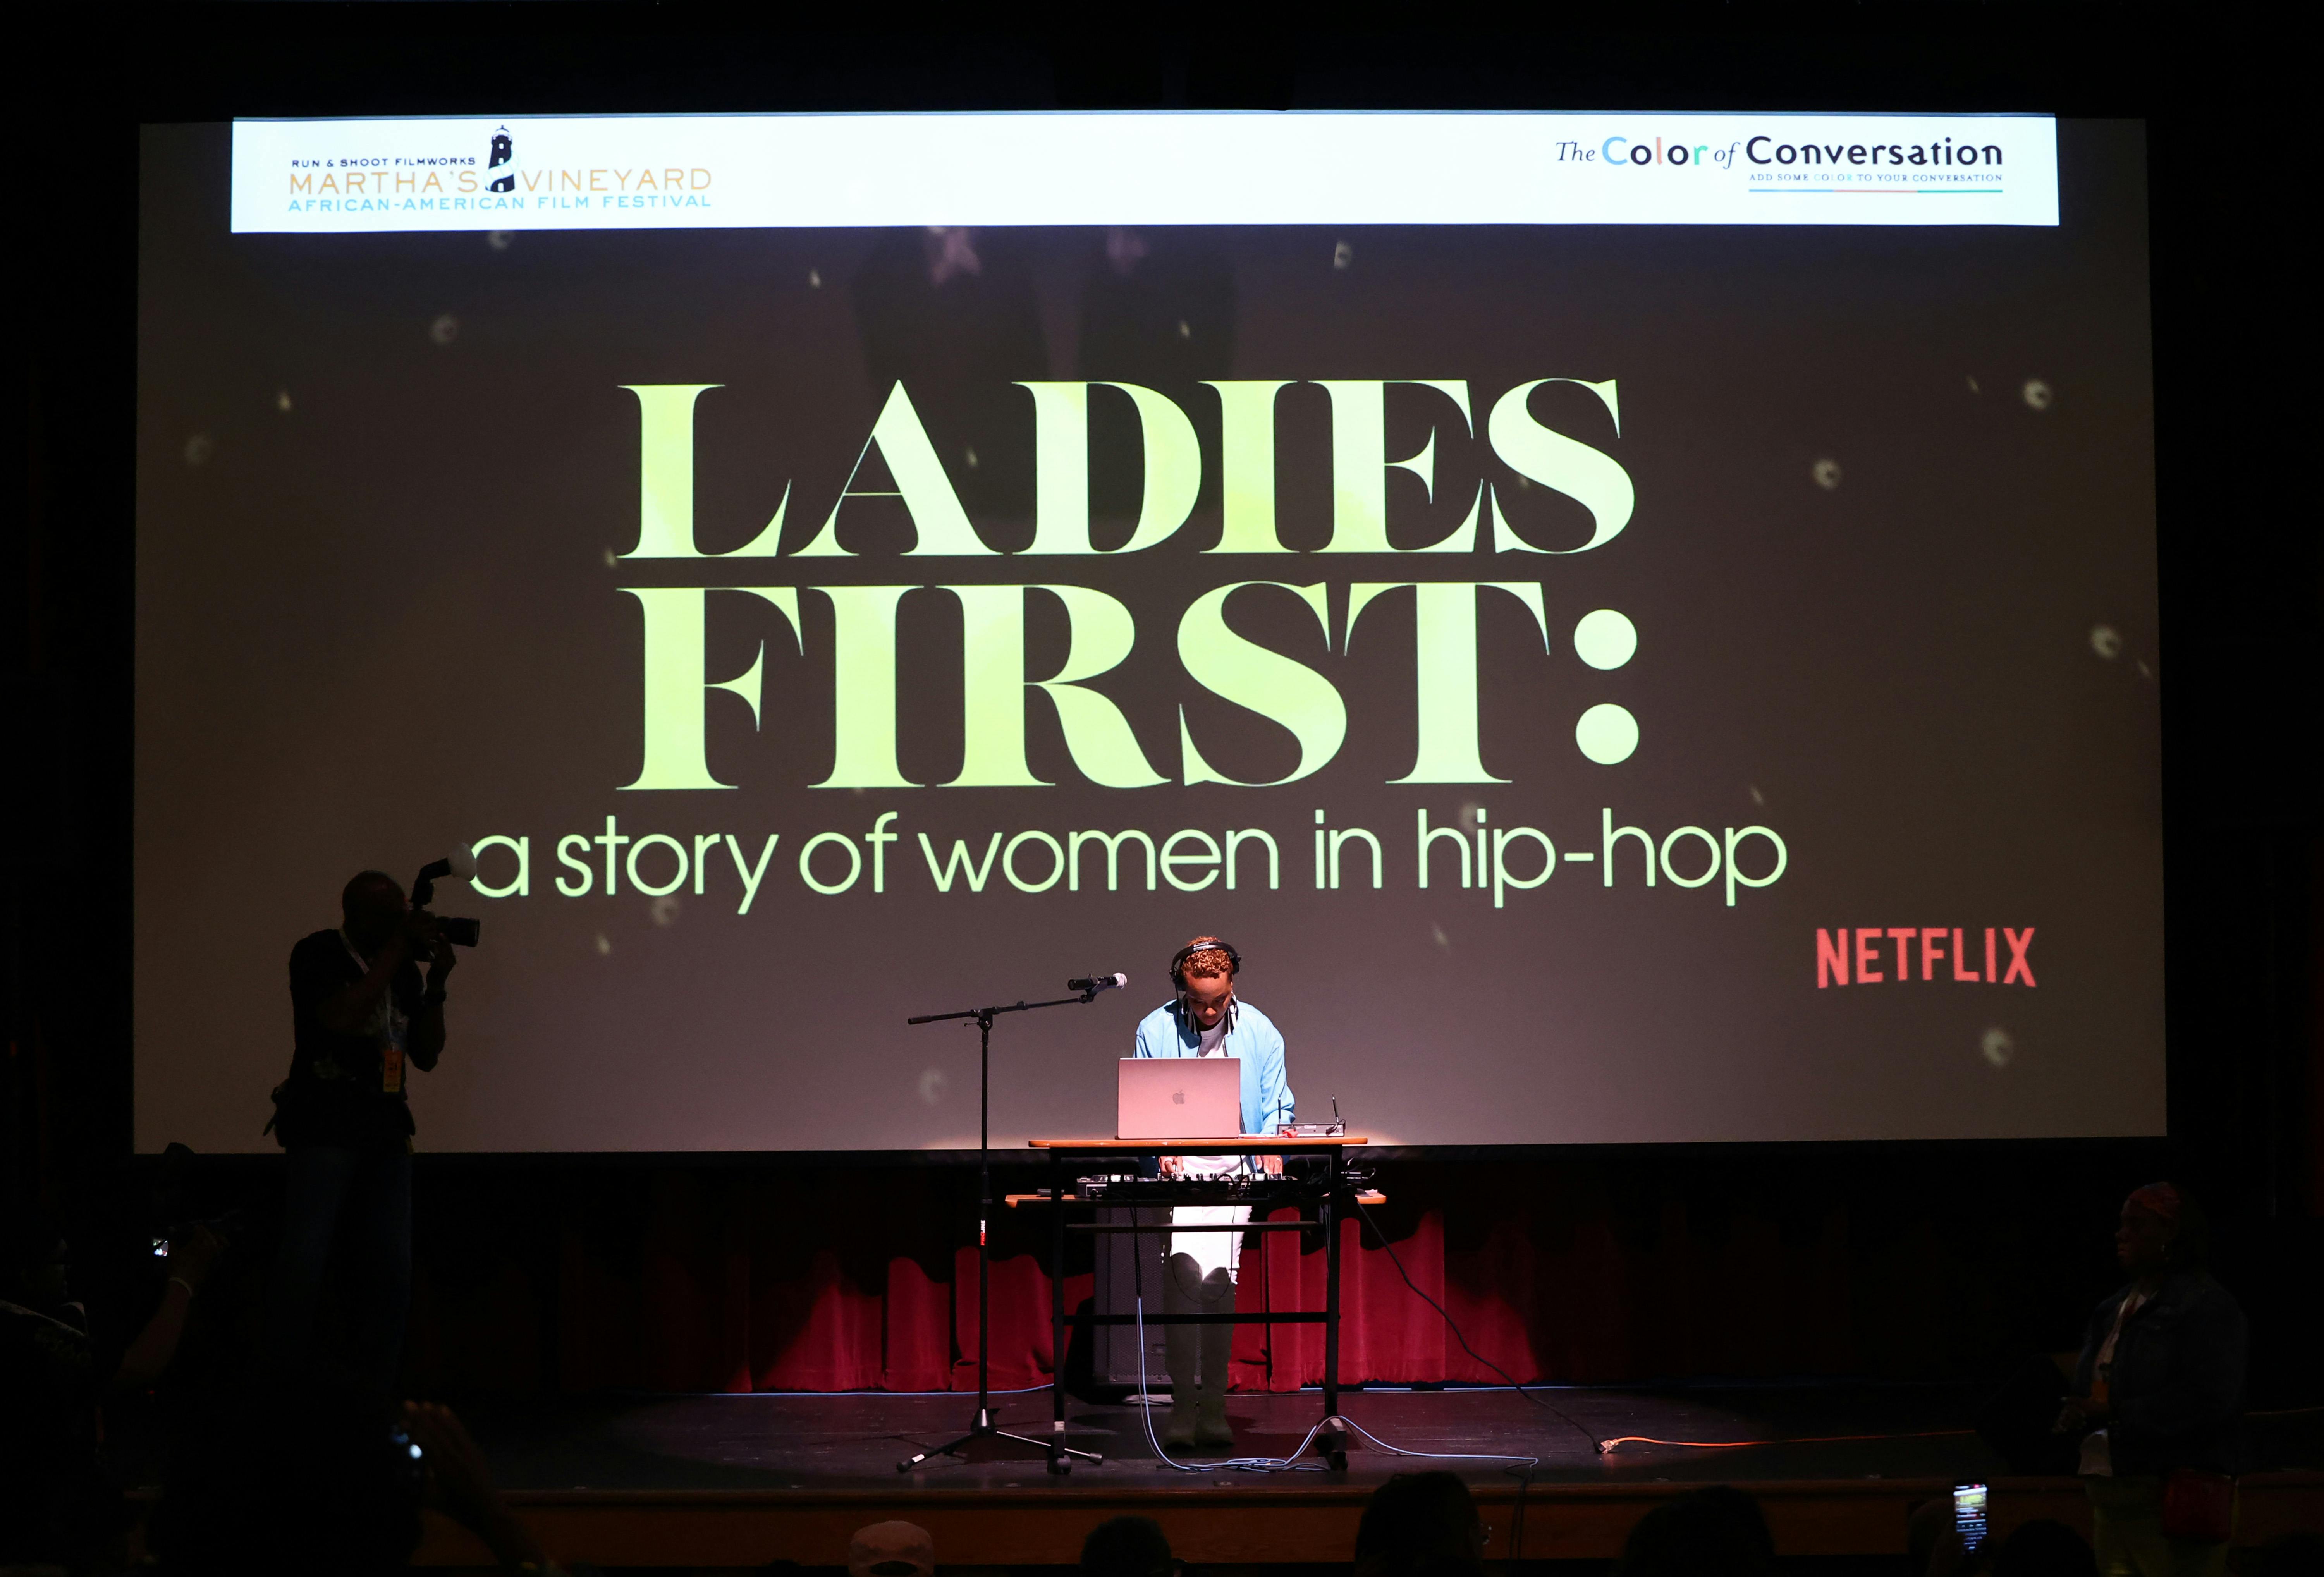 A woman appears to DJ from a laptop onstage in front of a projection of "LADIES FIRST: a story of women in hip-hop"